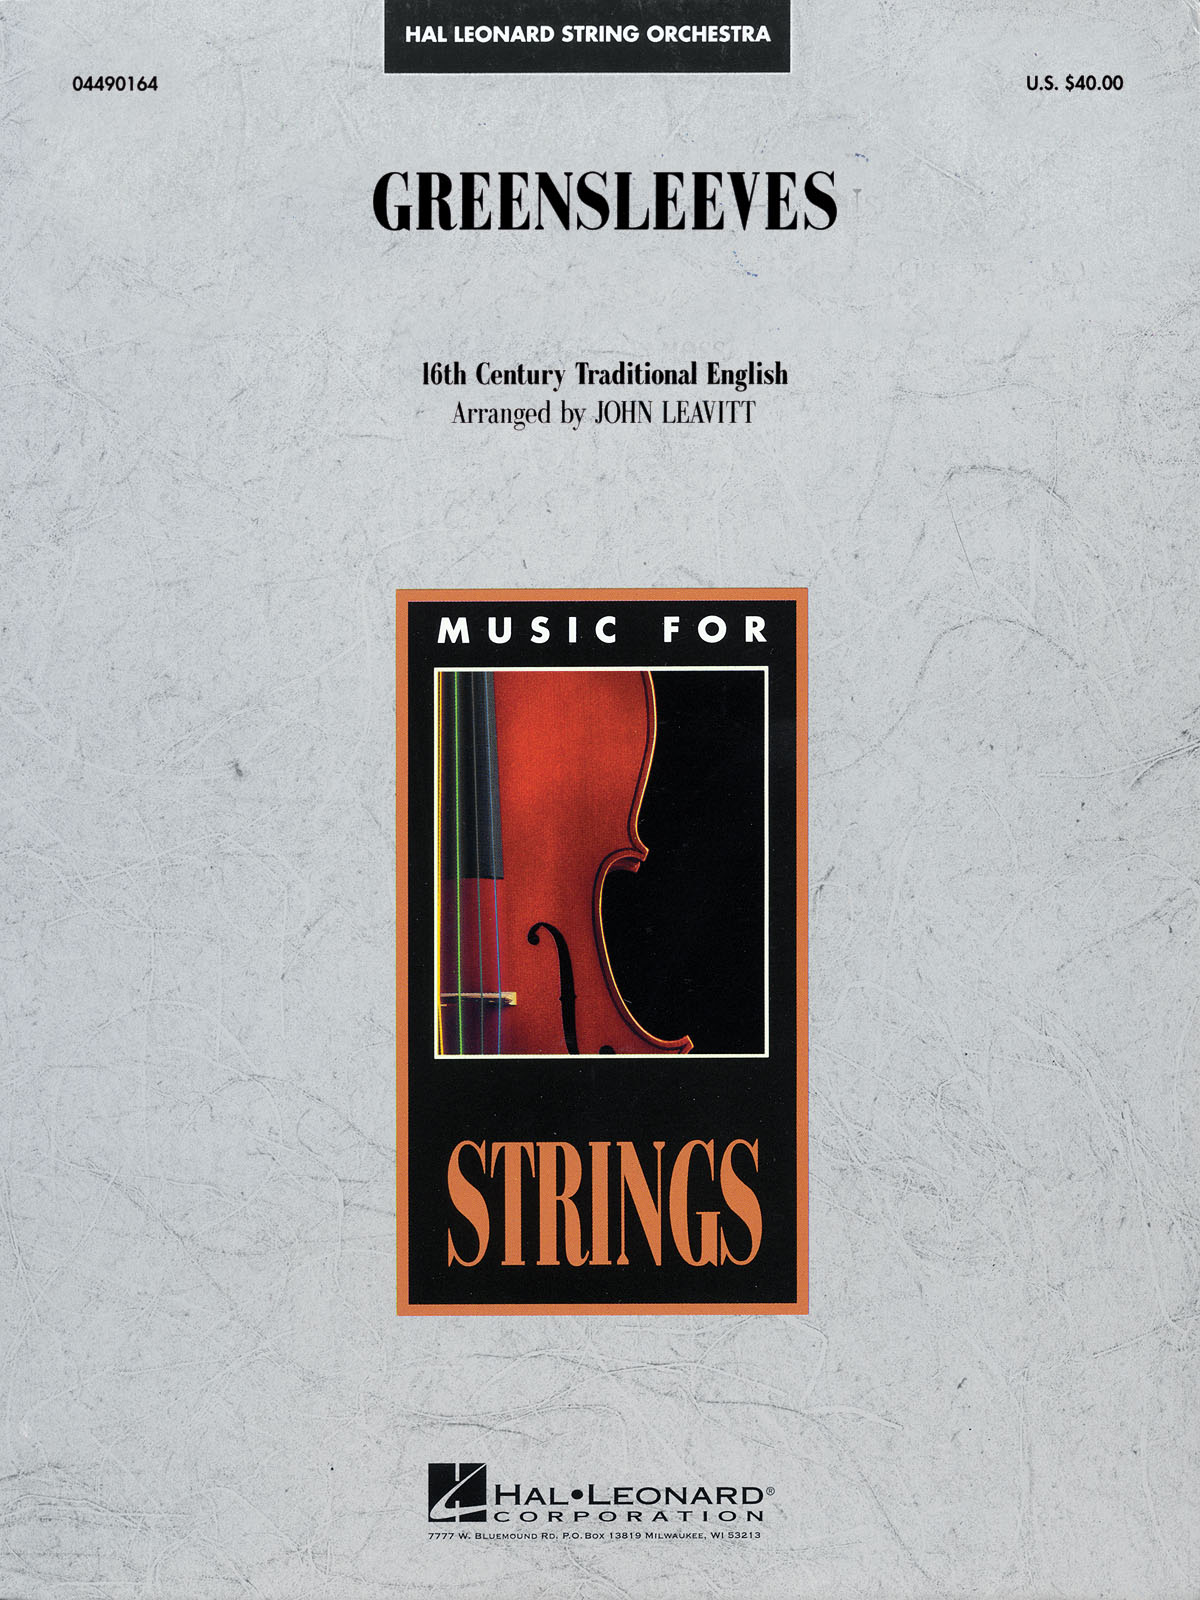 Greensleeves: String Orchestra: Score